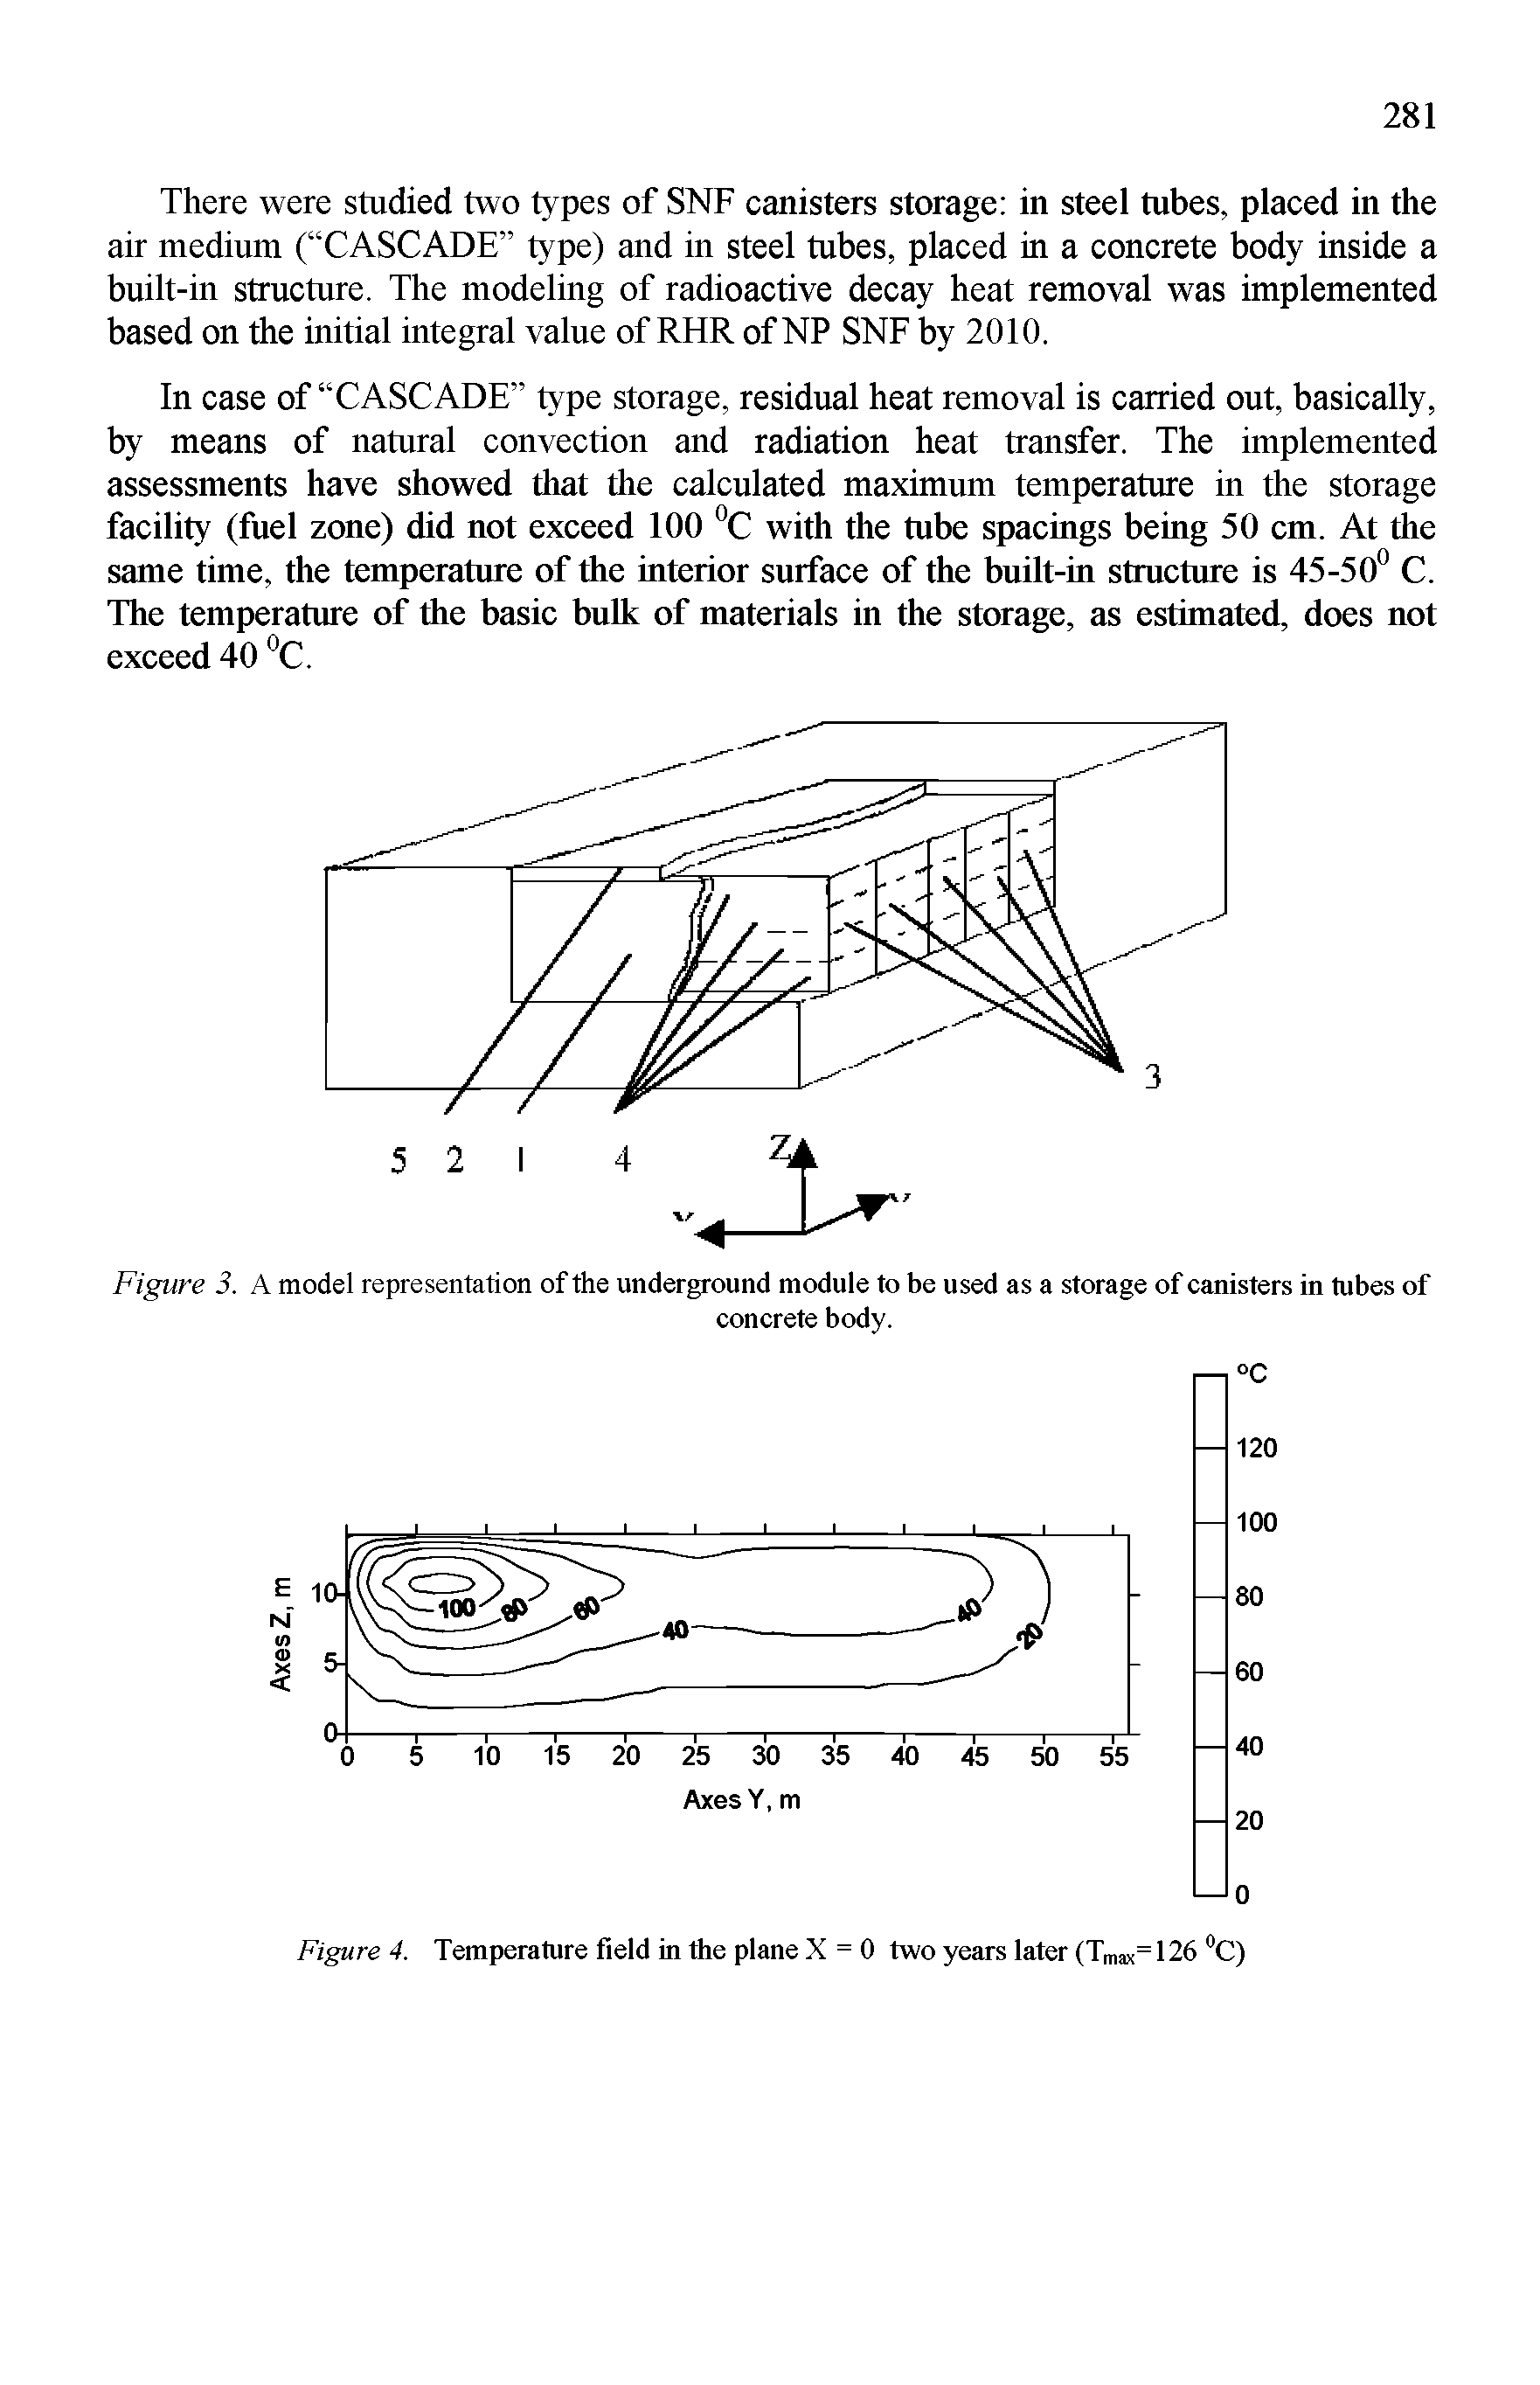 Figure 3. A model representation of the underground module to be used as a storage of canisters in tubes of...